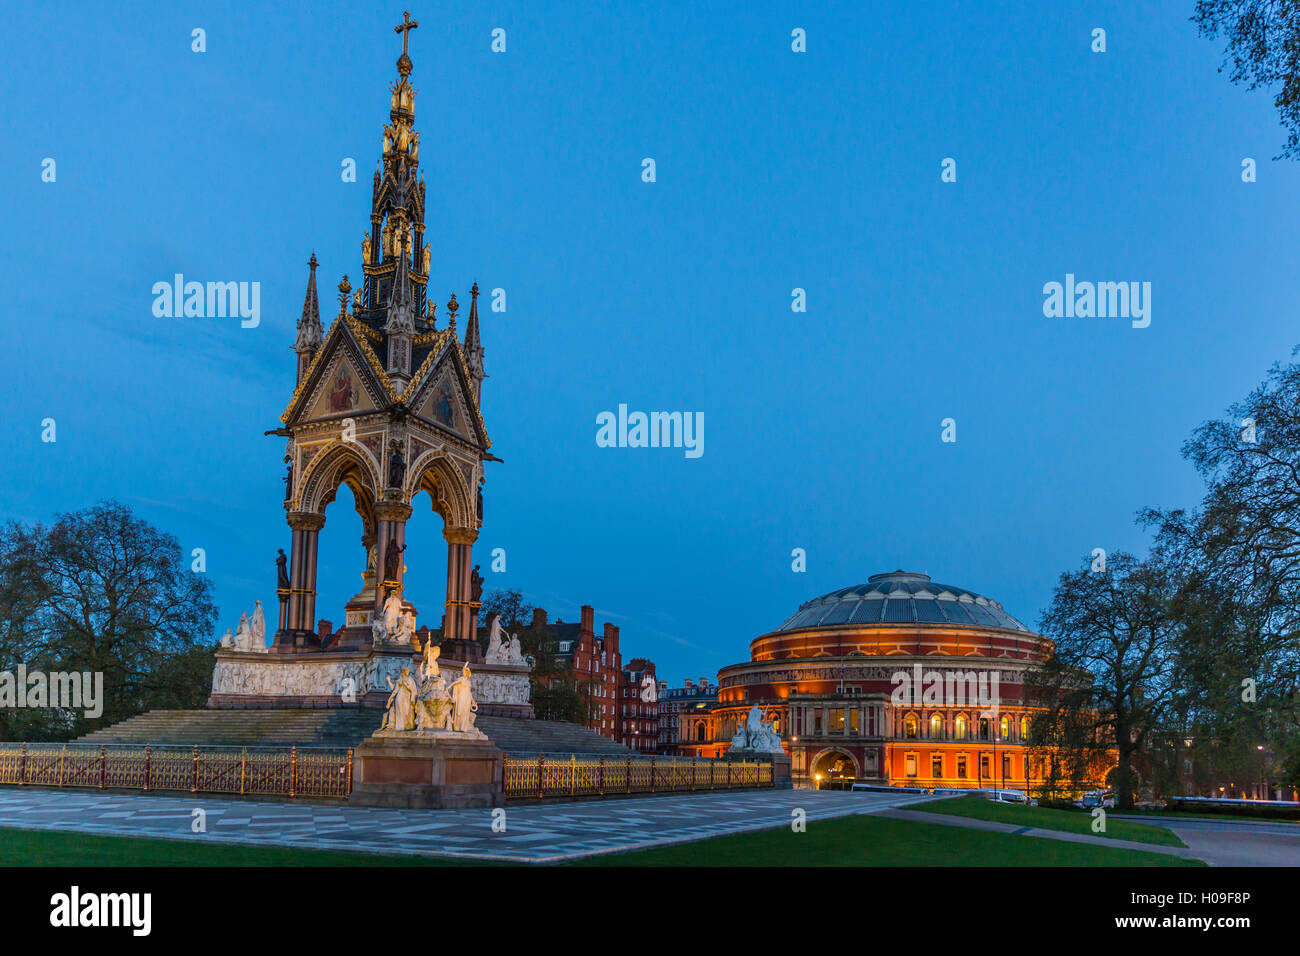 The Albert Memorial in front of the Royal Albert Hall, London, England, United Kingdom, Europe Stock Photo